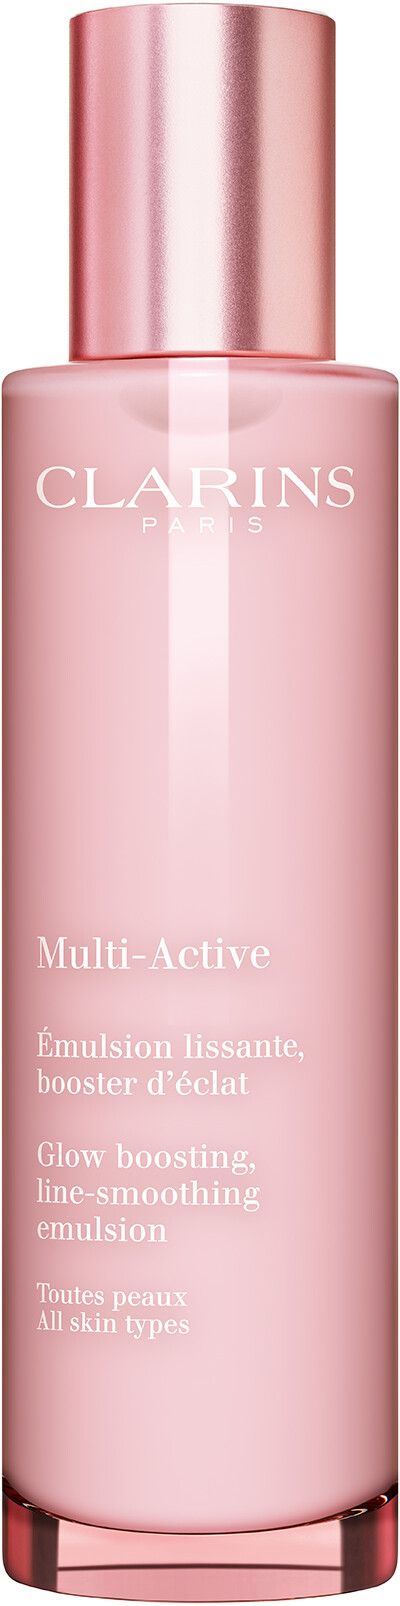 Clarins Multi-Active Day Emulsion - All Skin Types 100ml